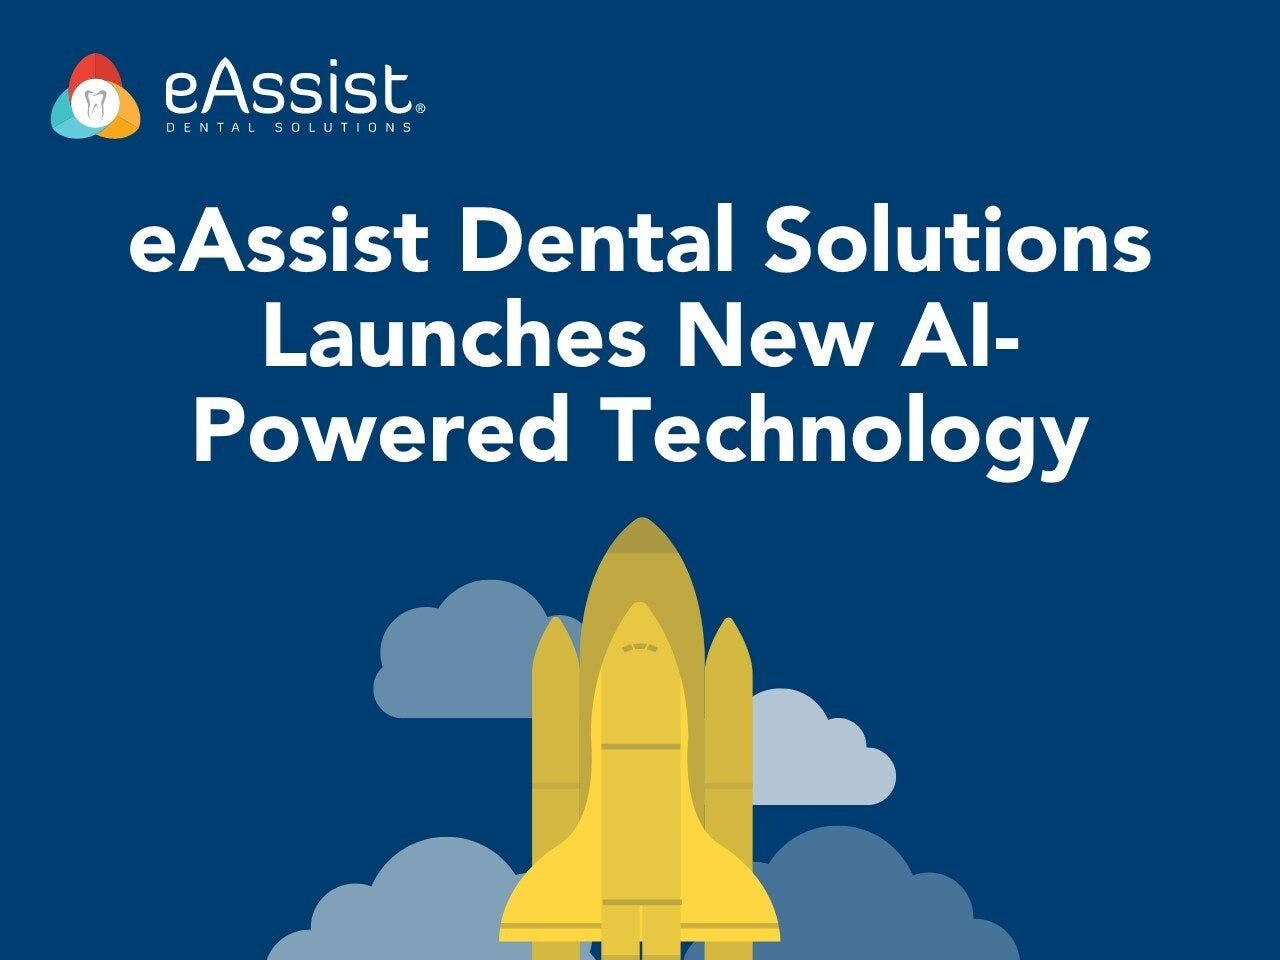 eAssist Dental Solutions Revolutionizes Dental Billing with AI-Powered Technology. Image credit: © eAssist Dental Solutions